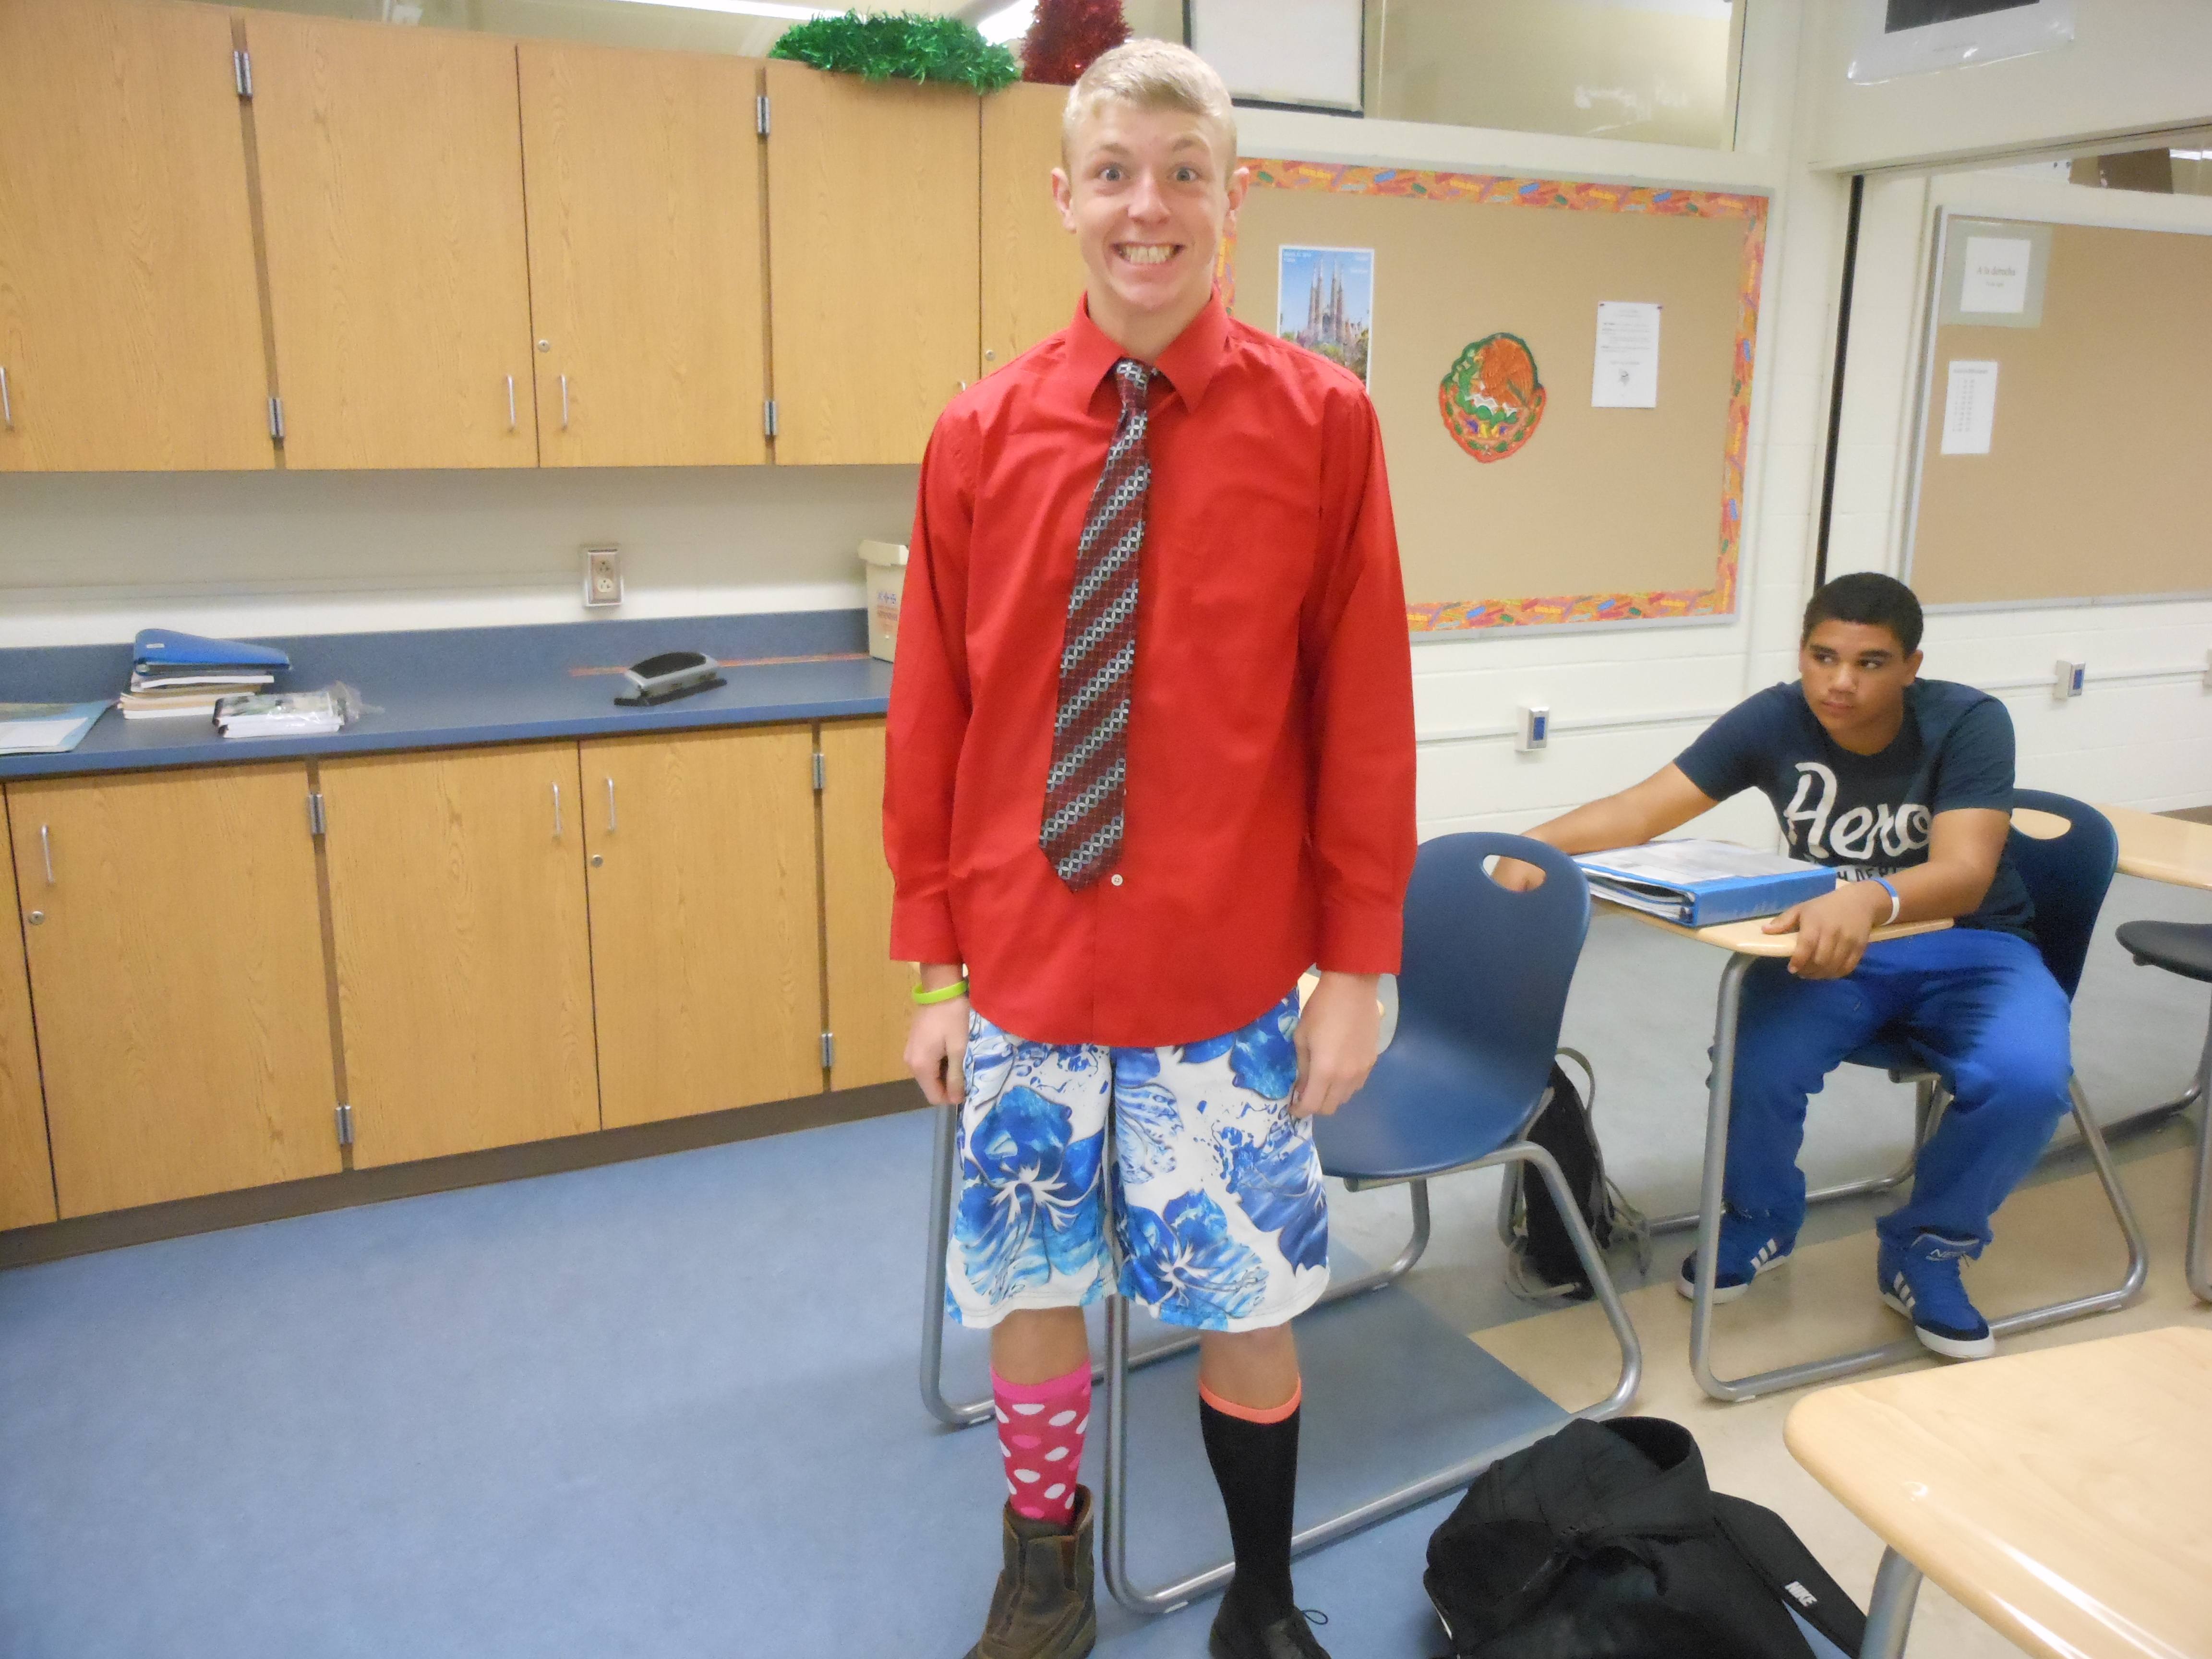 Mismatch Outfits Guys- 25 Ideas What to Wear on Mismatch Day